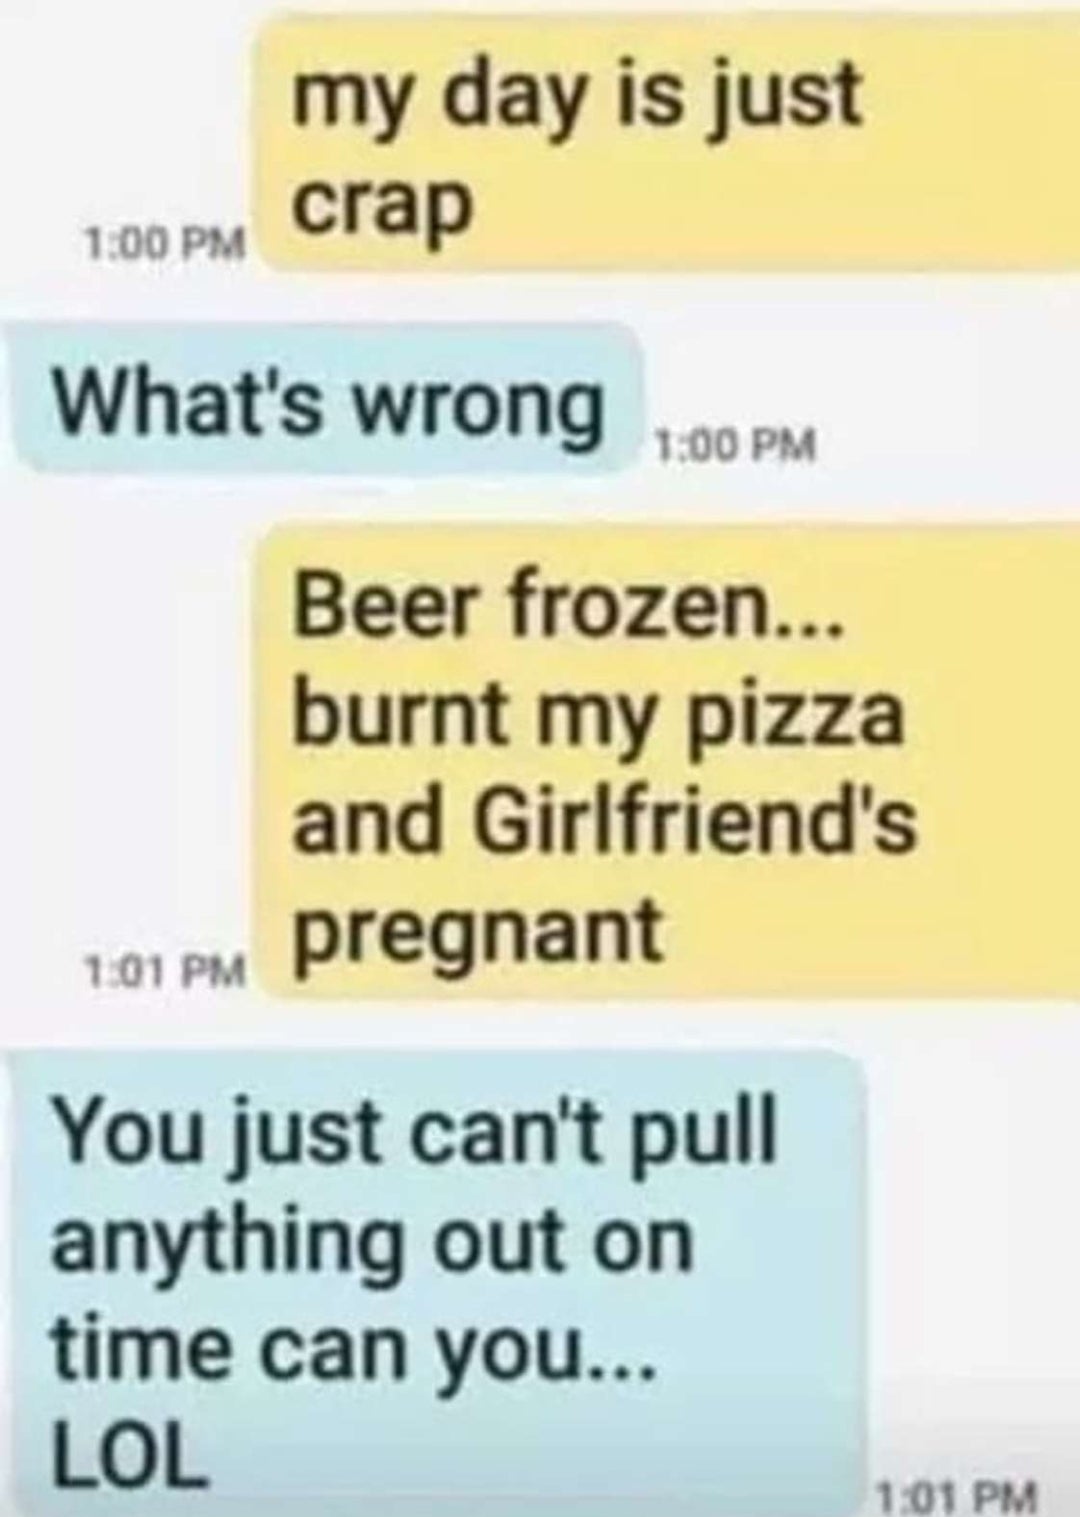 my day is just crap What's wrong Beer frozen... burnt my pizza and Girlfriend's 101 Pm pregrann pregnant You just can't pull anything out on time can you... Lol